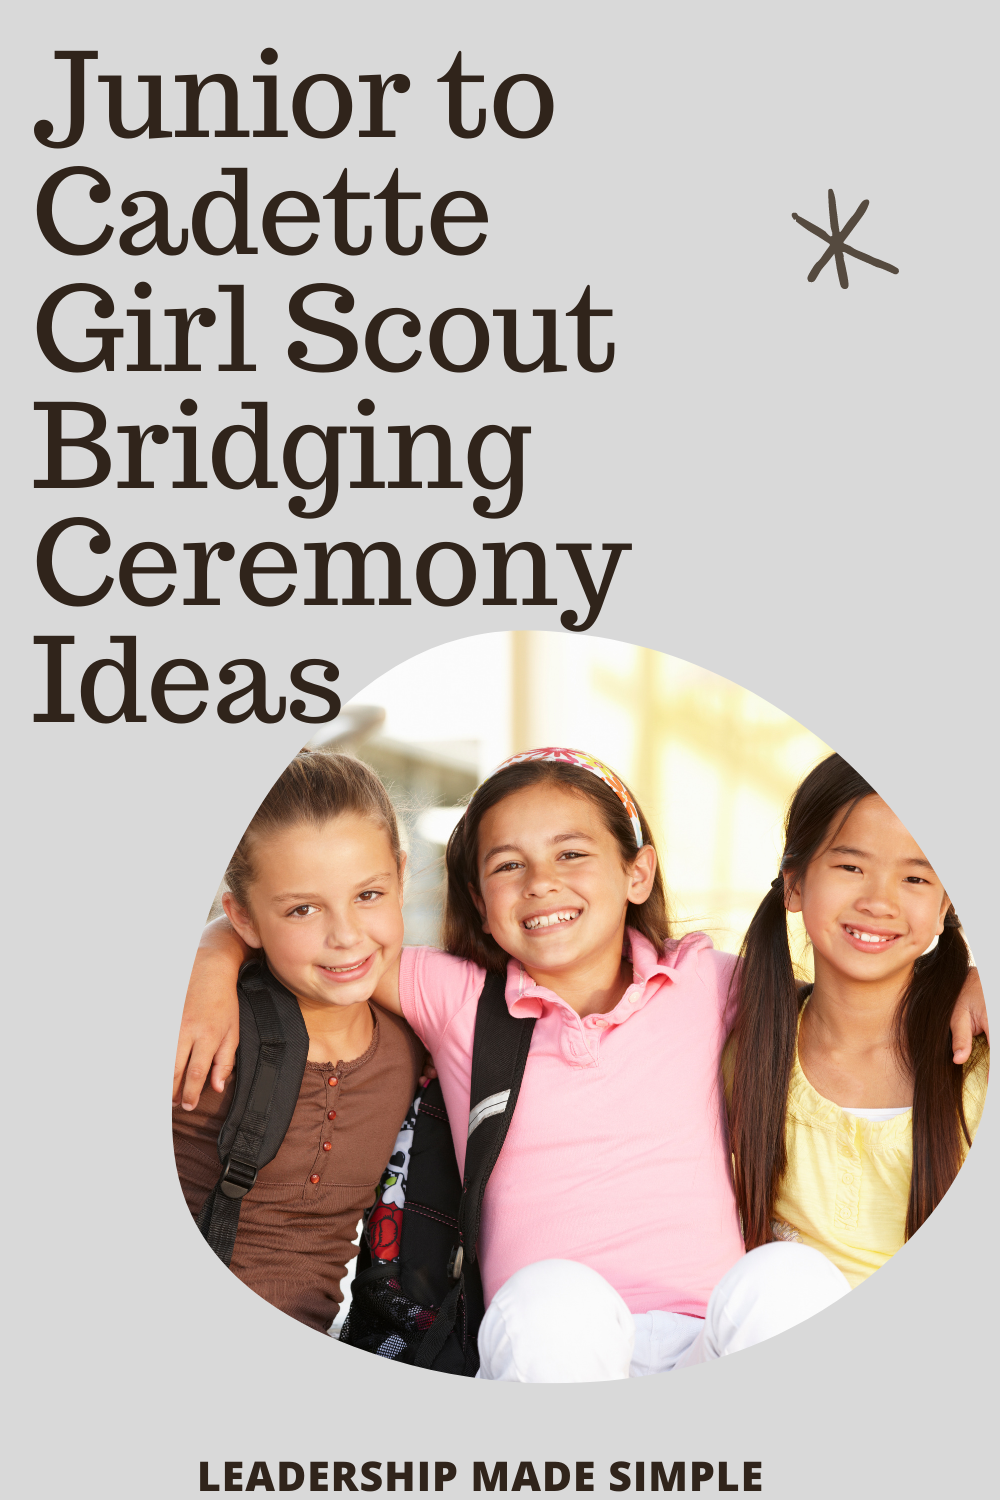 Junior to Cadette Girl Scout Bridging Ceremony Resources for Leaders